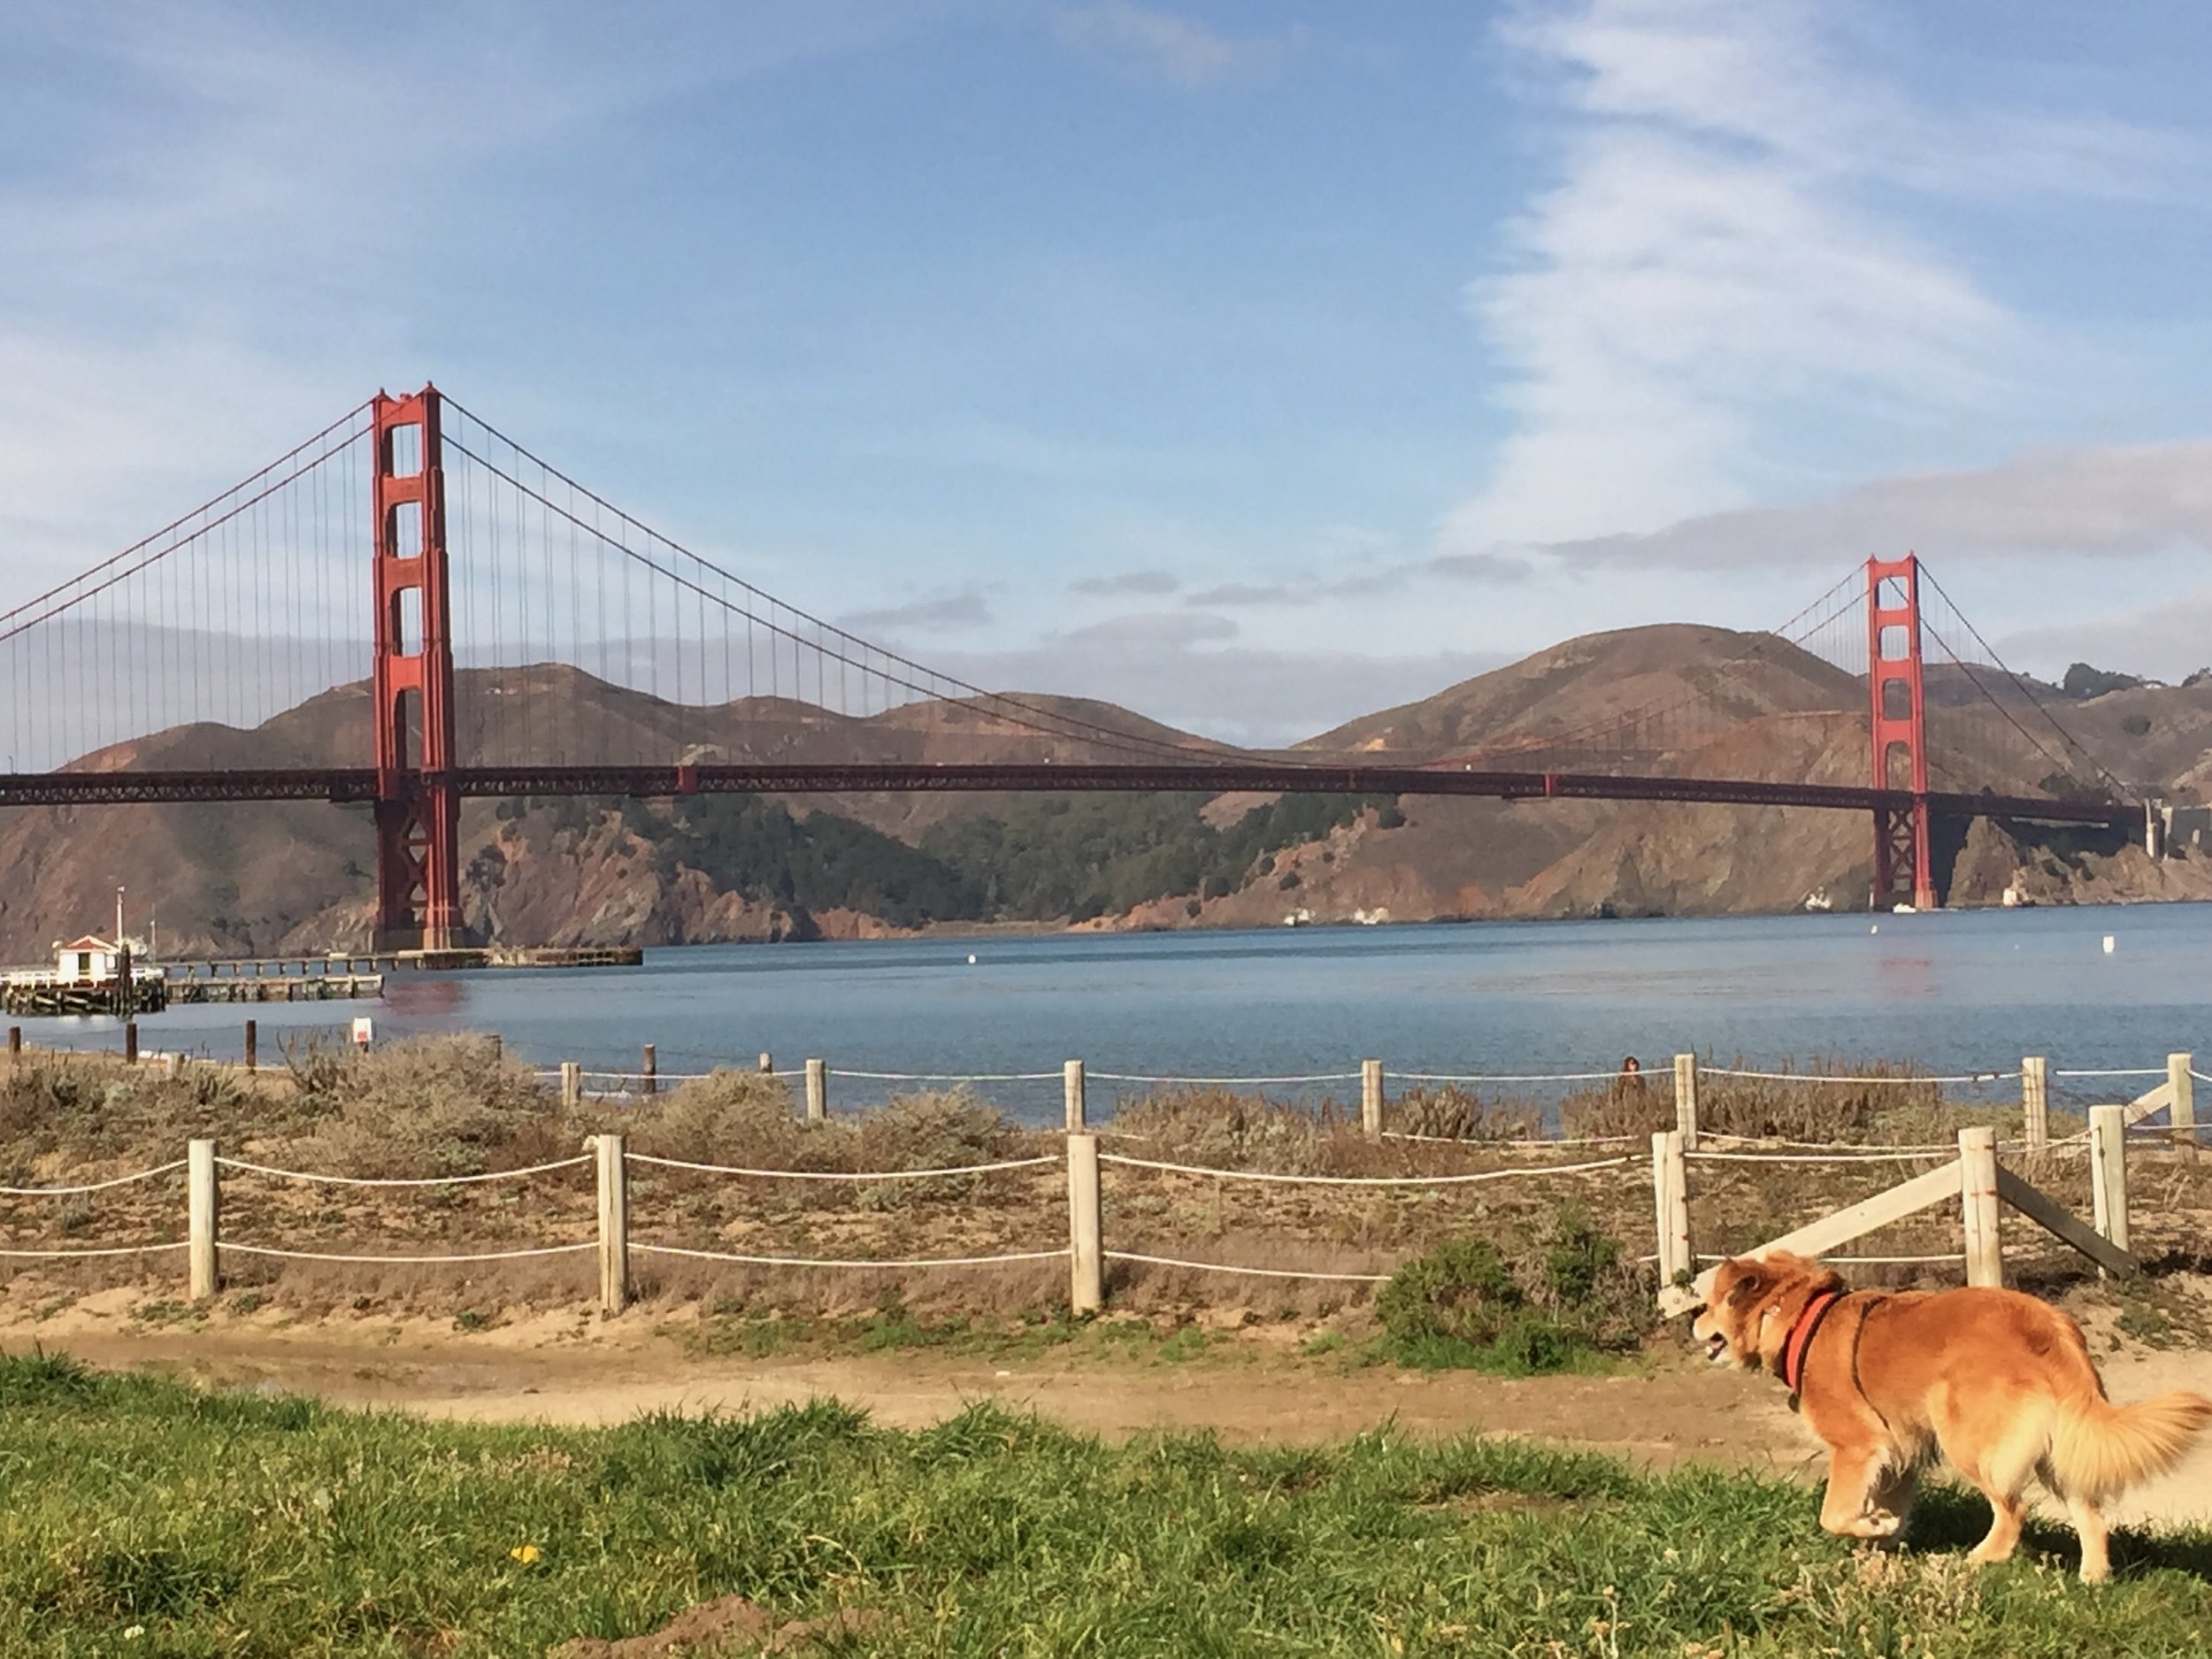 Mango and the GGB